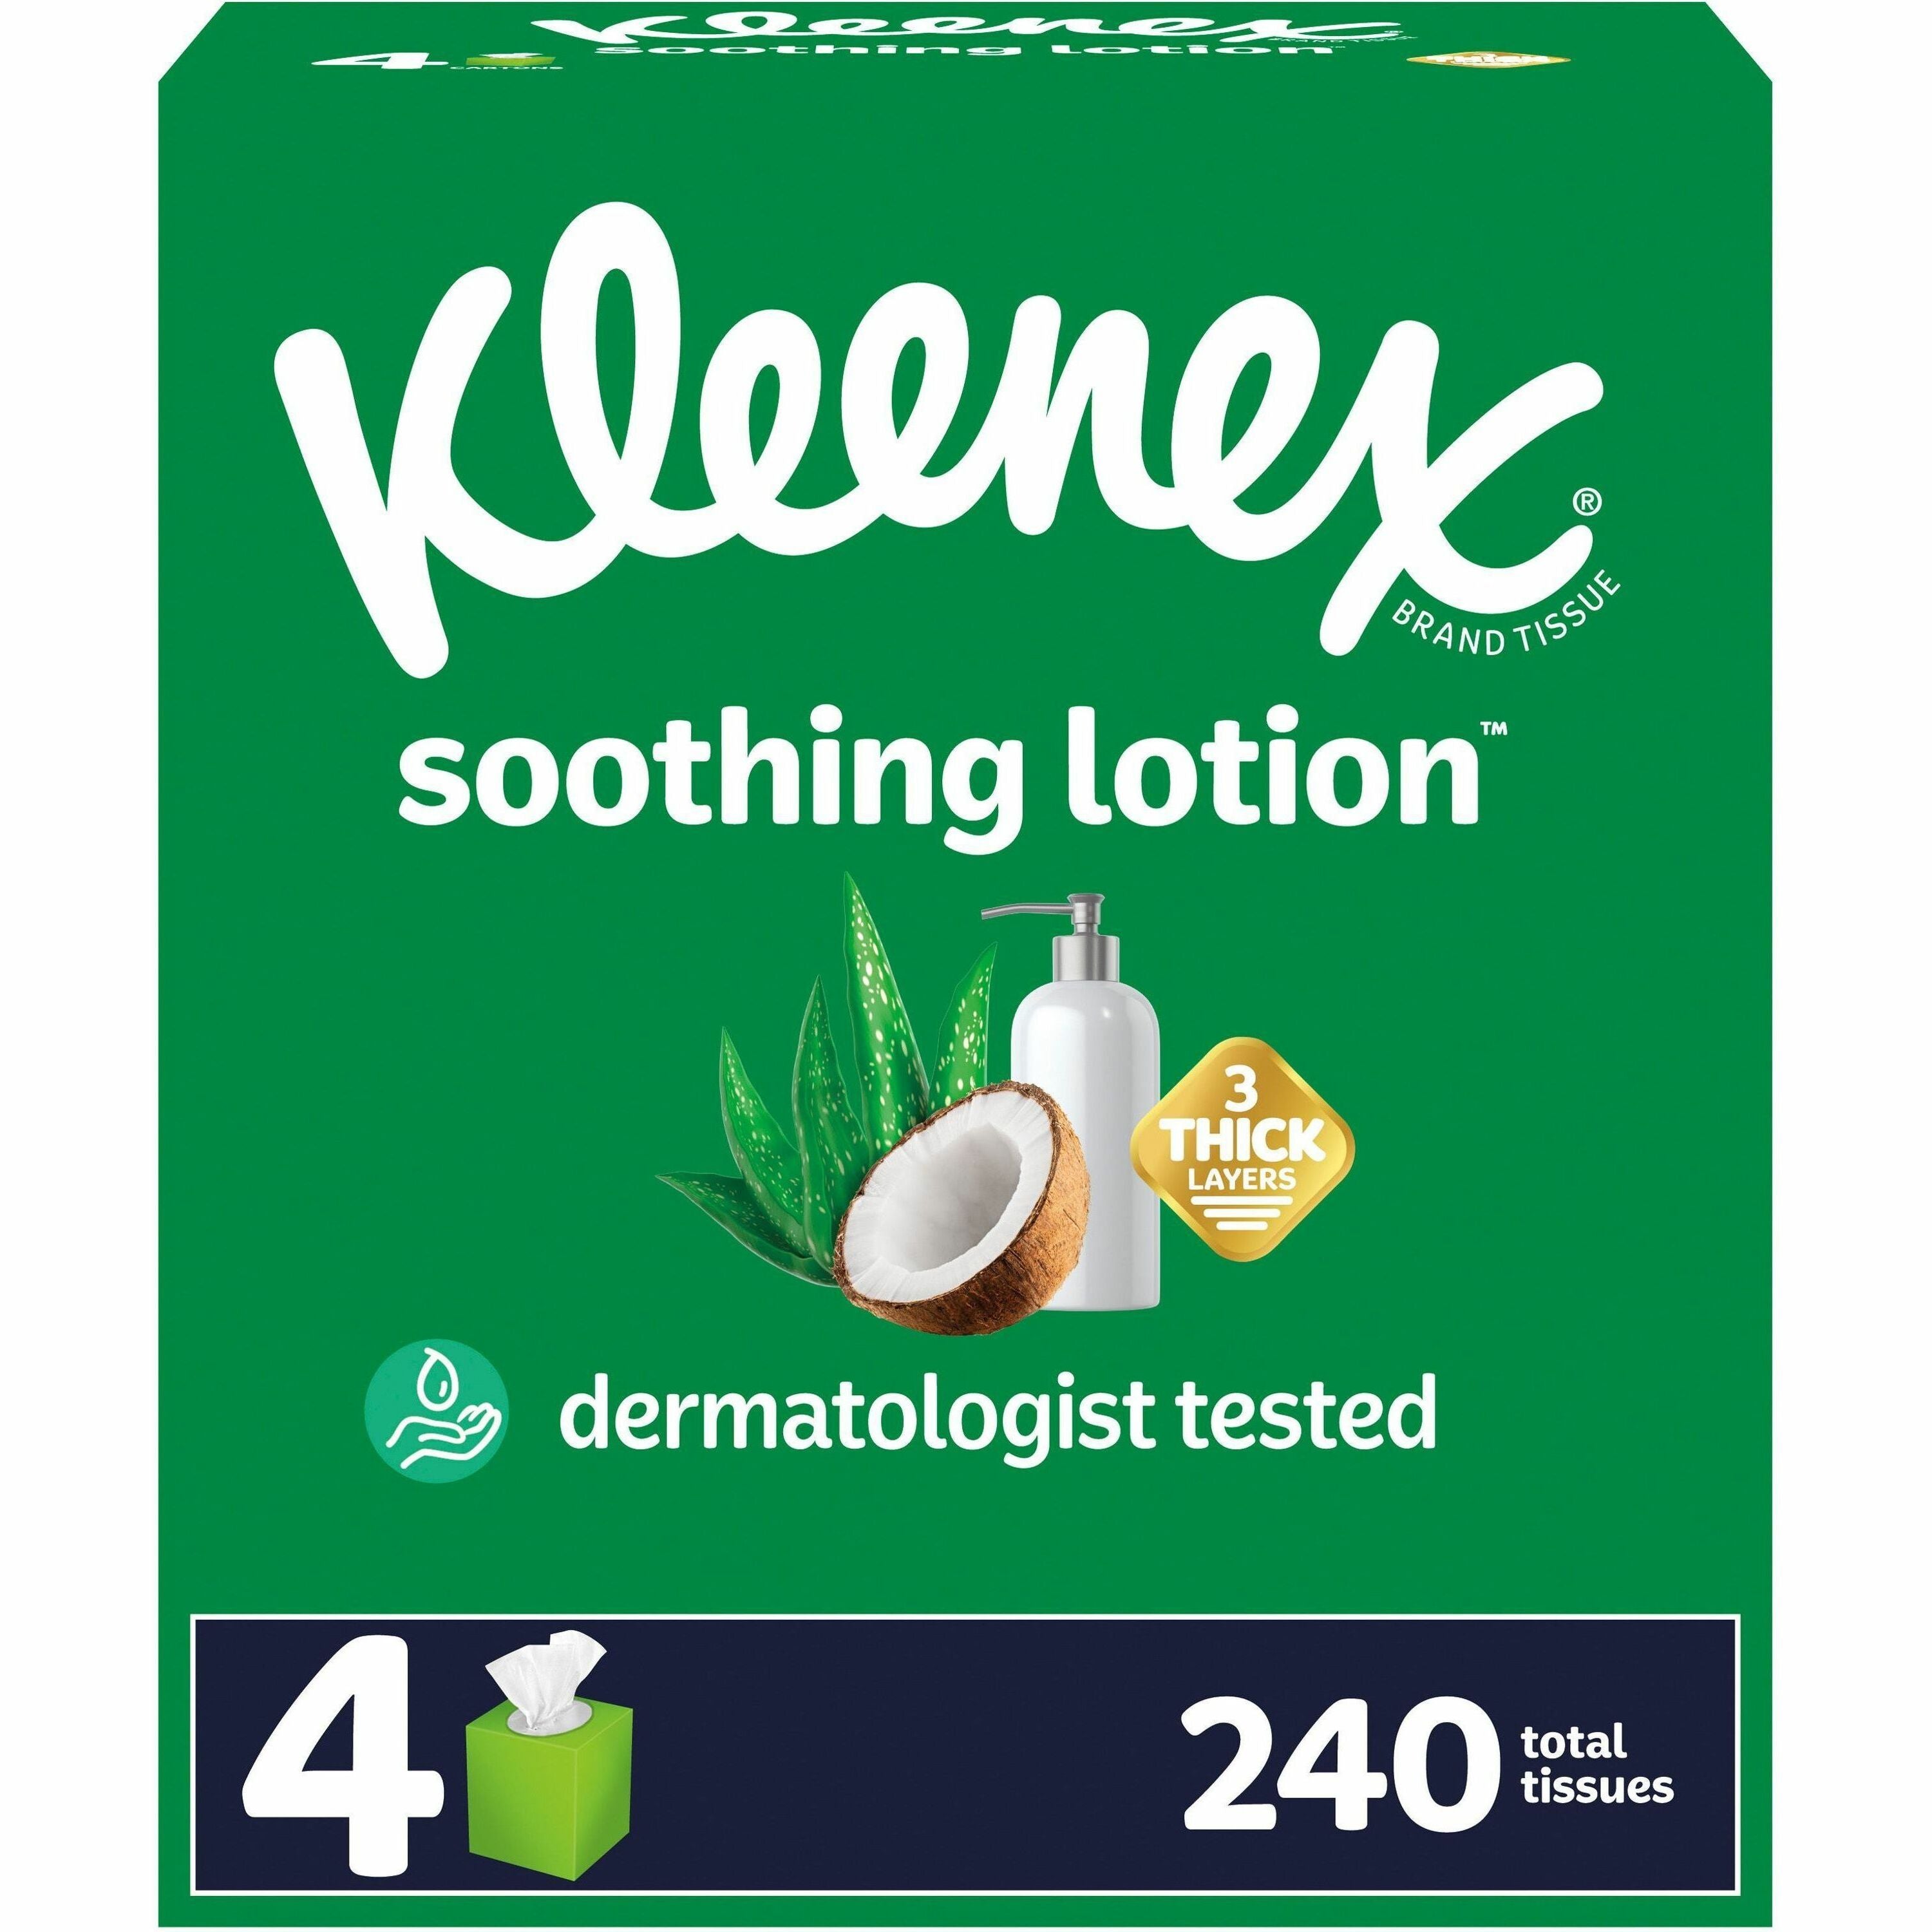 kleenex-soothing-lotion-tissues-3-ply-white-moisturizing-soft-strong-for-face-home-office-business-skin-60-per-box-8-carton_kcc54289ct - 1